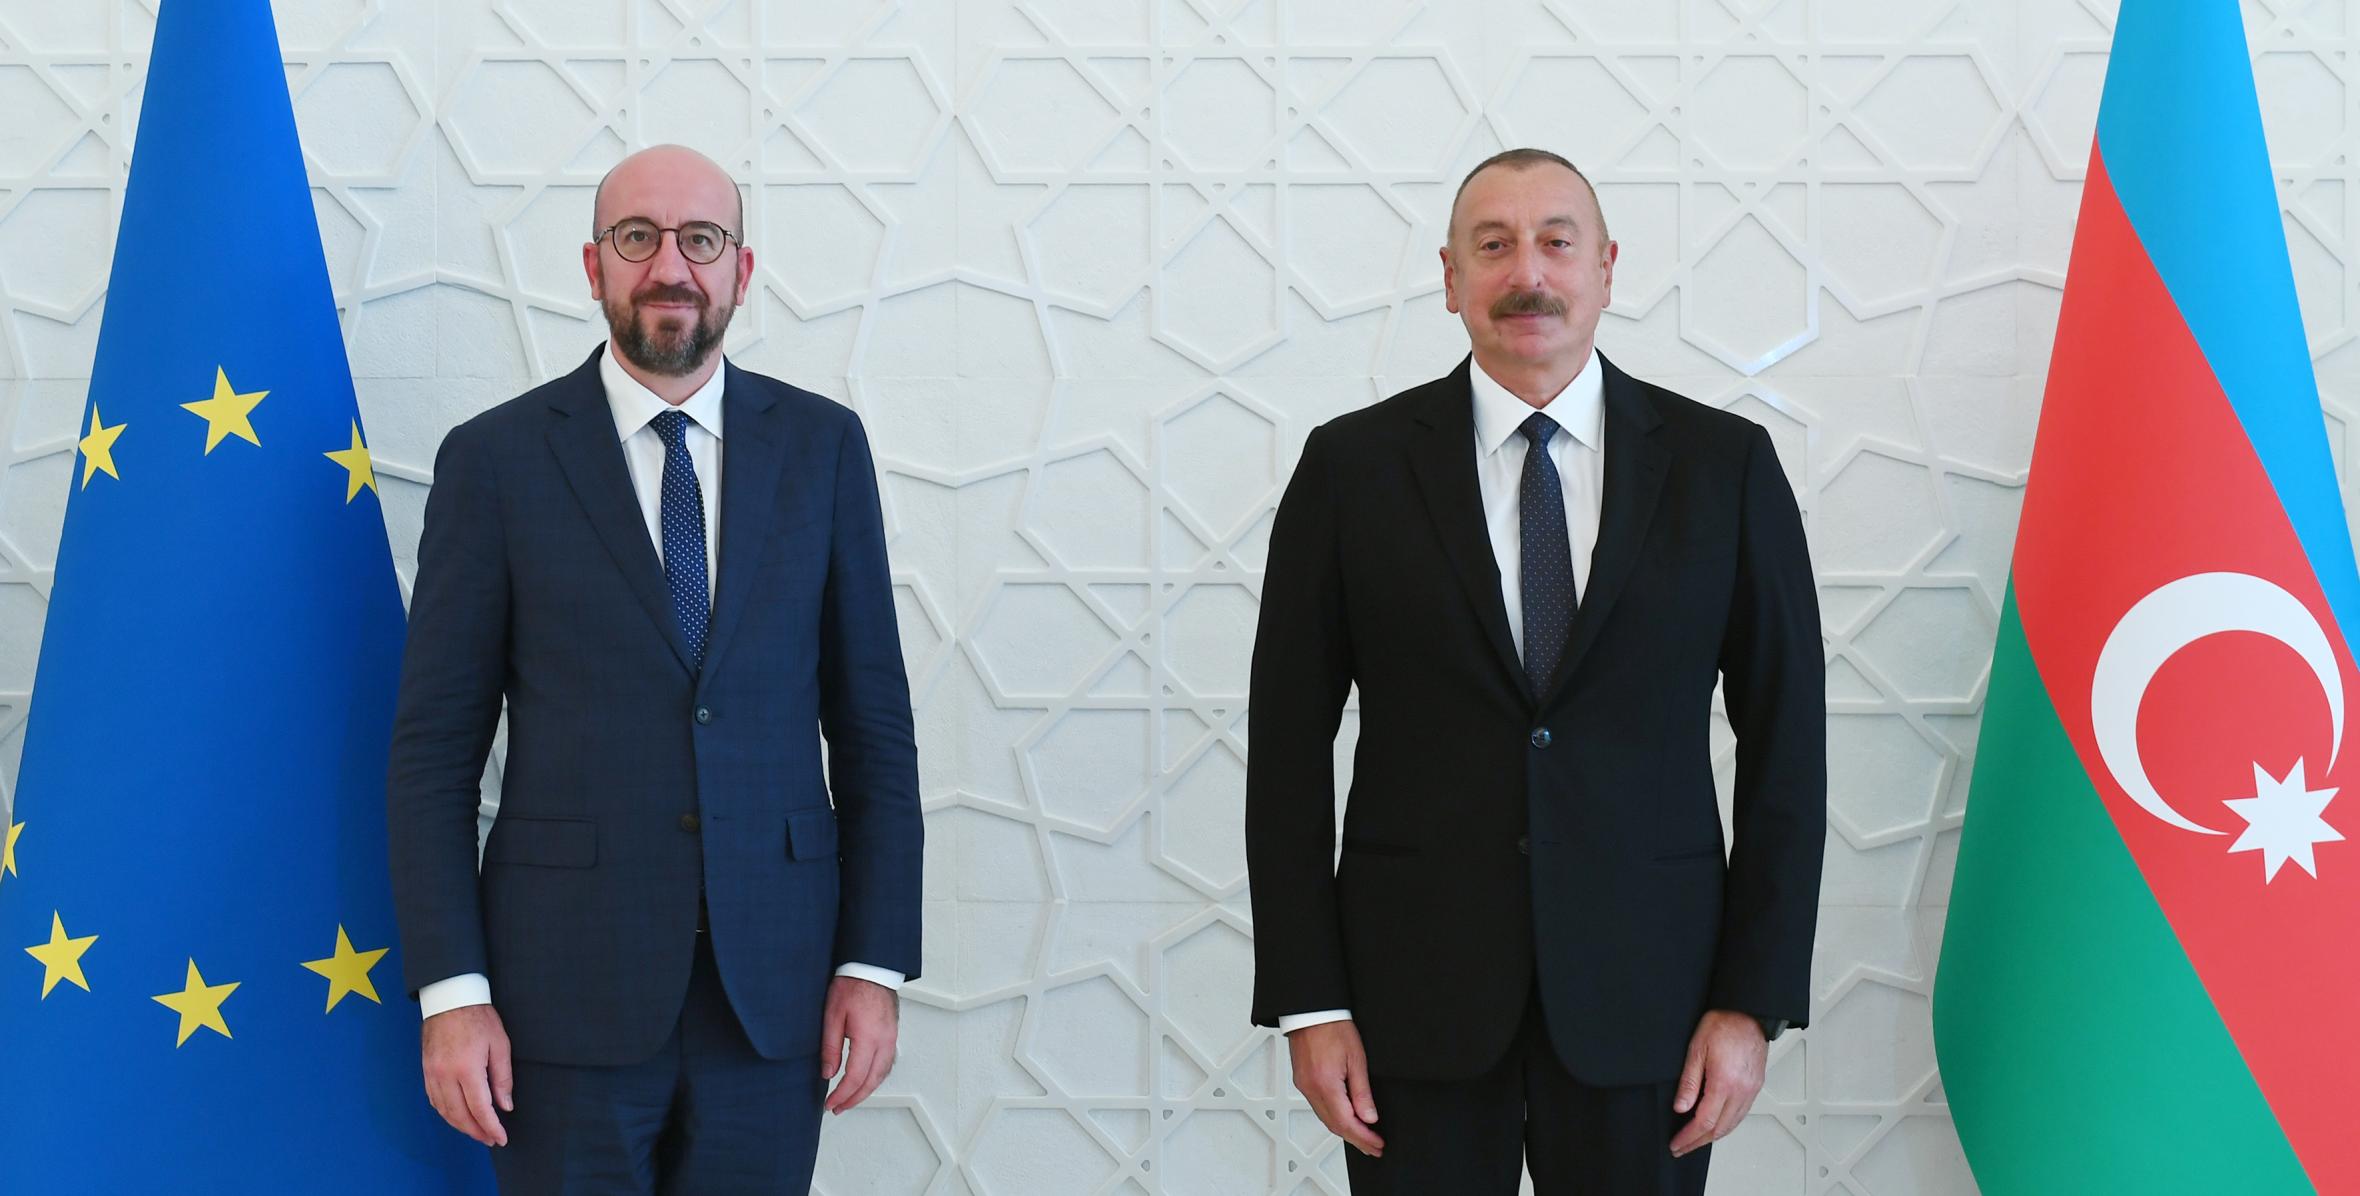 Ilham Aliyev and President of European Council Charles Michel had joint working dinner